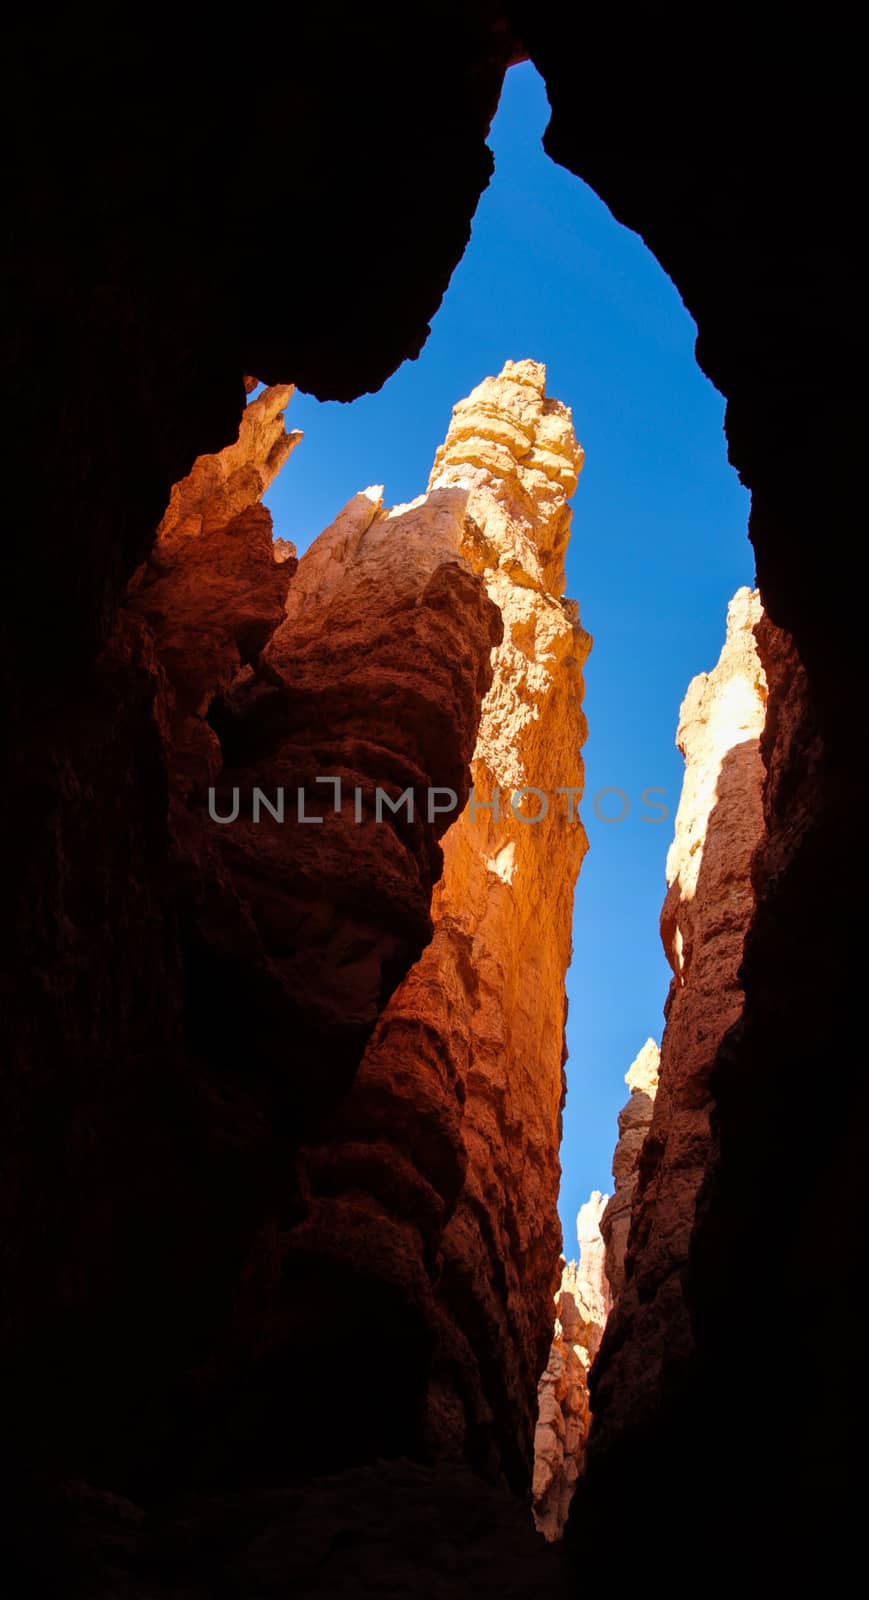 View from the bottom of canyon. Bryce Canyon National Park, Utah by dpetrakov